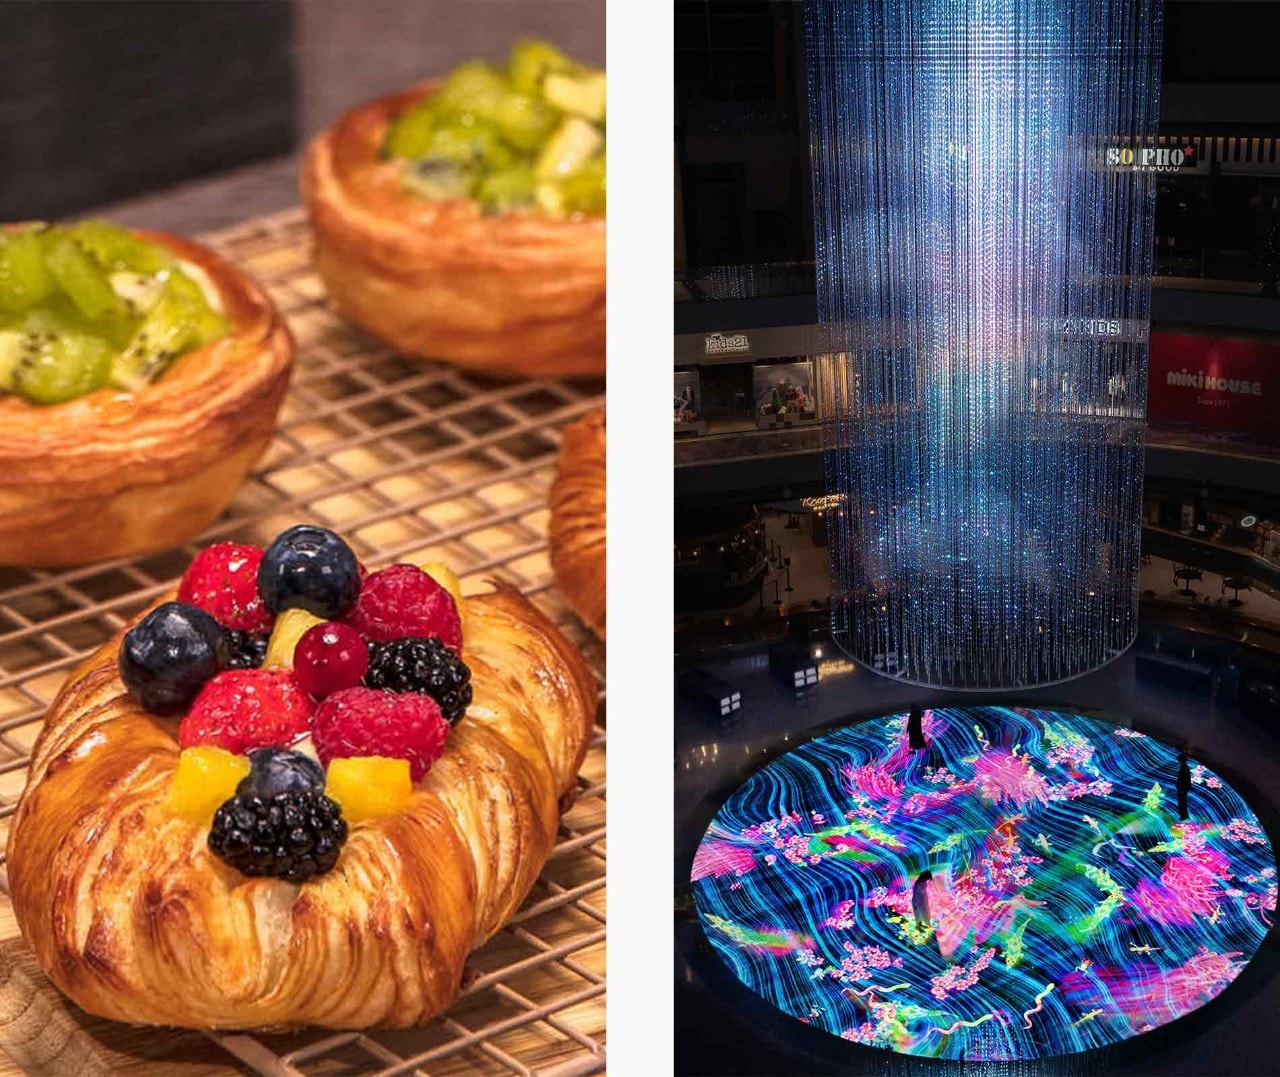 Desserts from Origin + Bloom and Digital Light Canvas, a popular attraction at Marina Bay Sands, Singapore